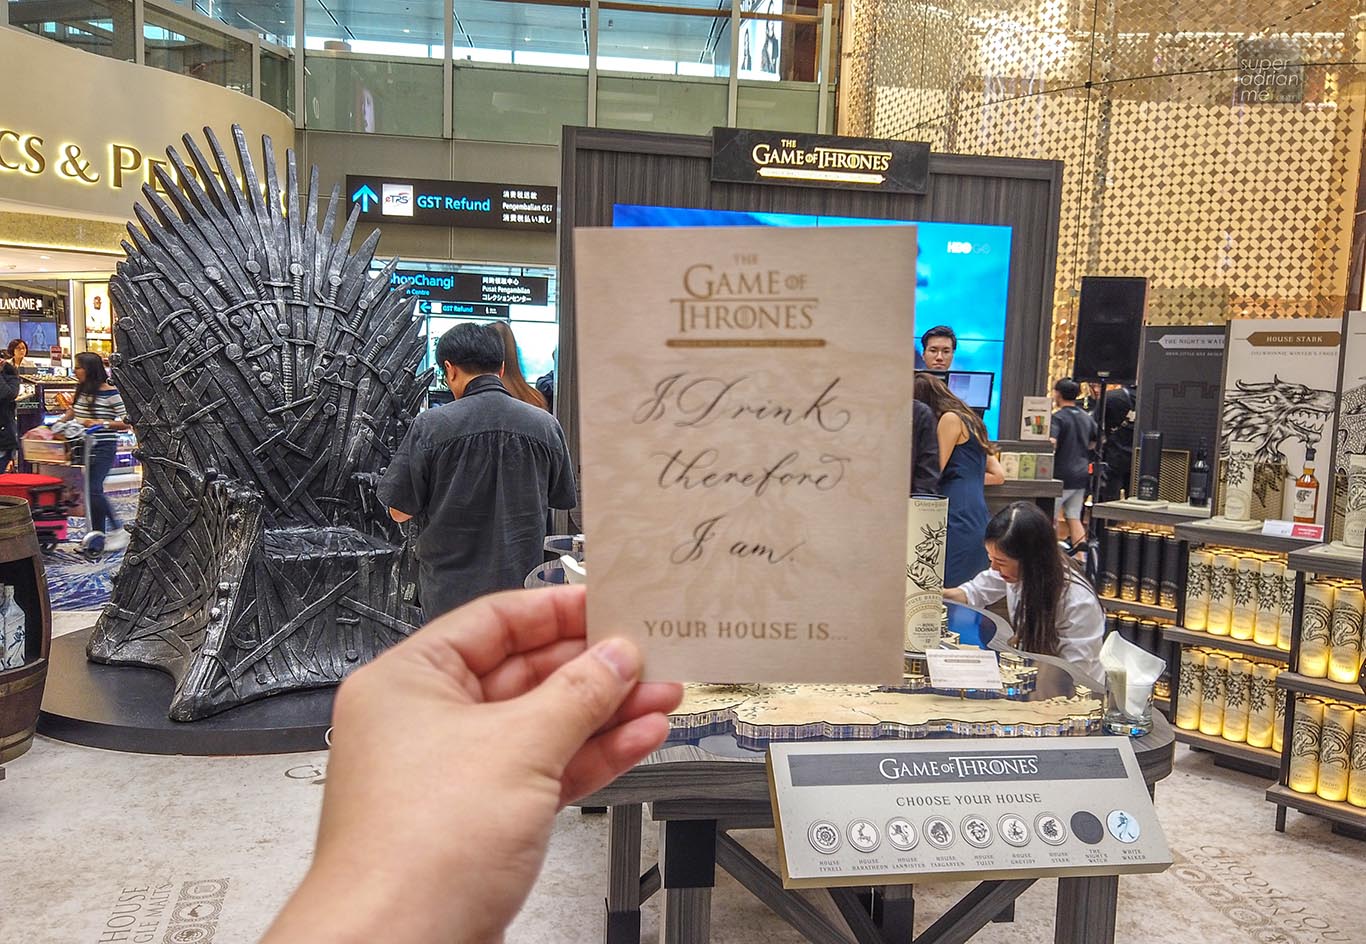 Game of Thrones activation at Changi Airport Terminal 3